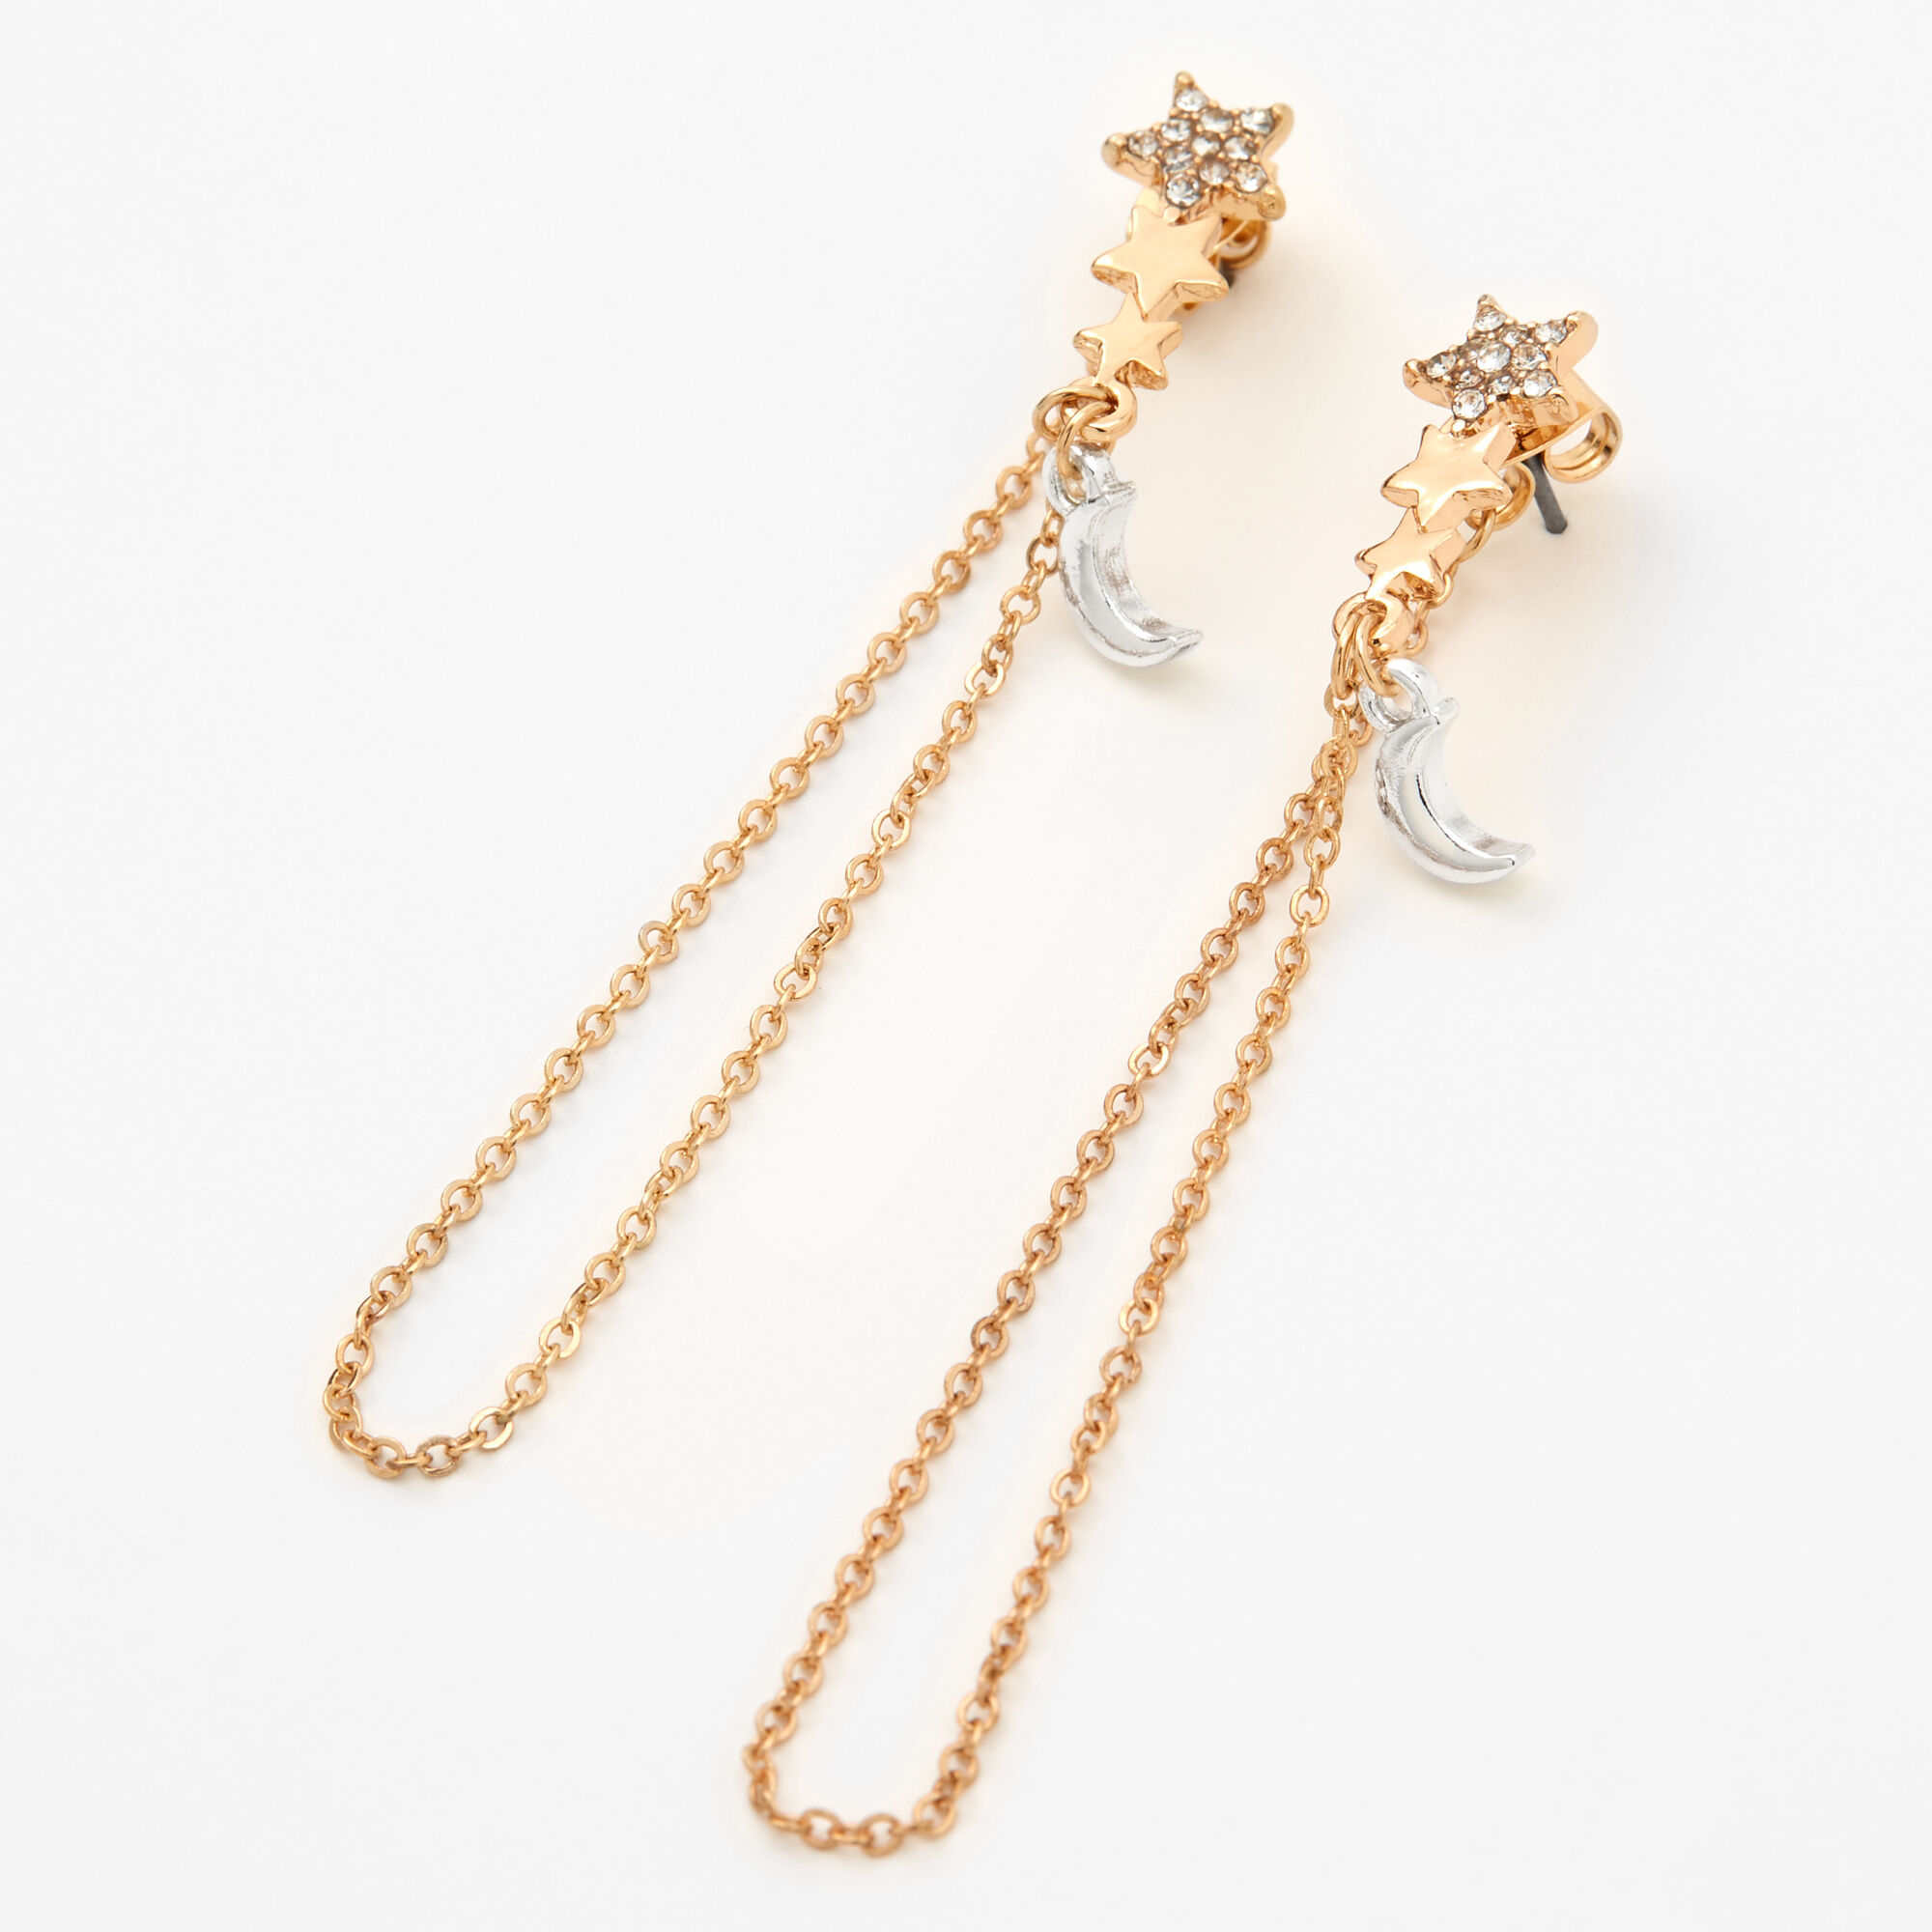 View Claires Tone 25 Celestial Chain Drop Earrings Gold information